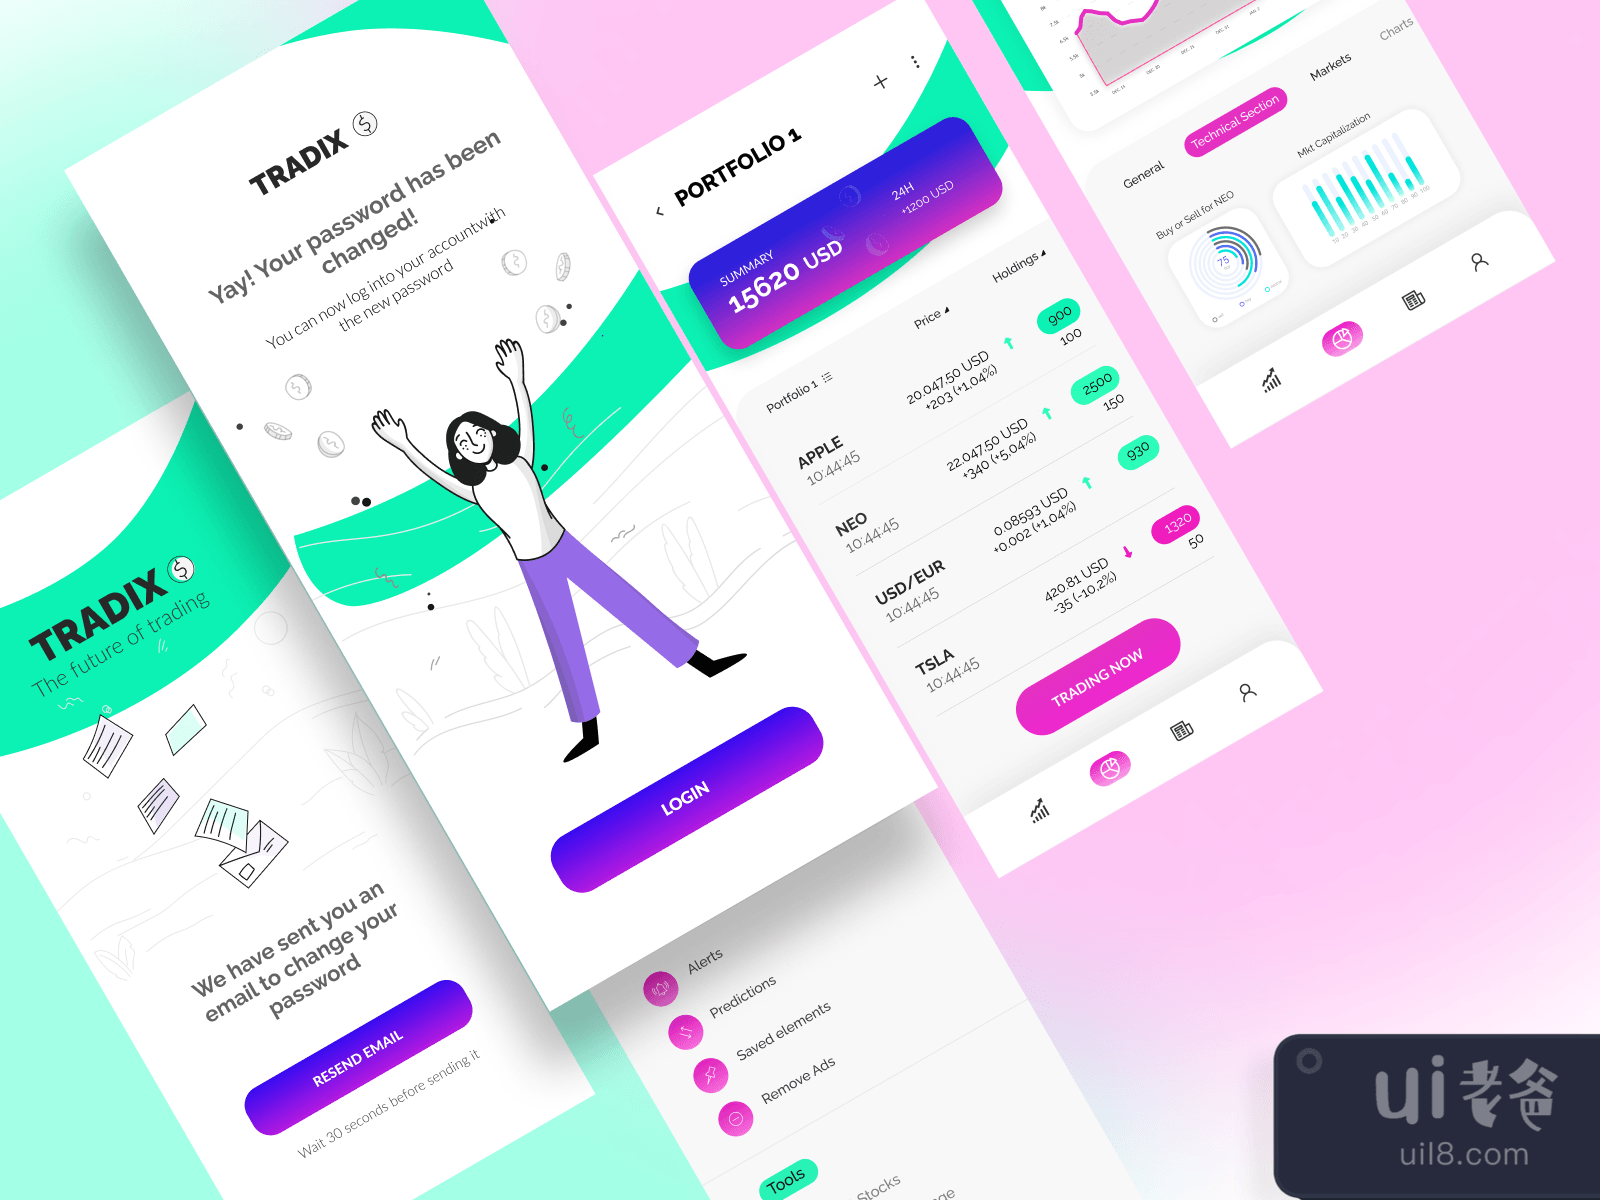 Trading App UI Kit for Figma and Adobe XD No 2